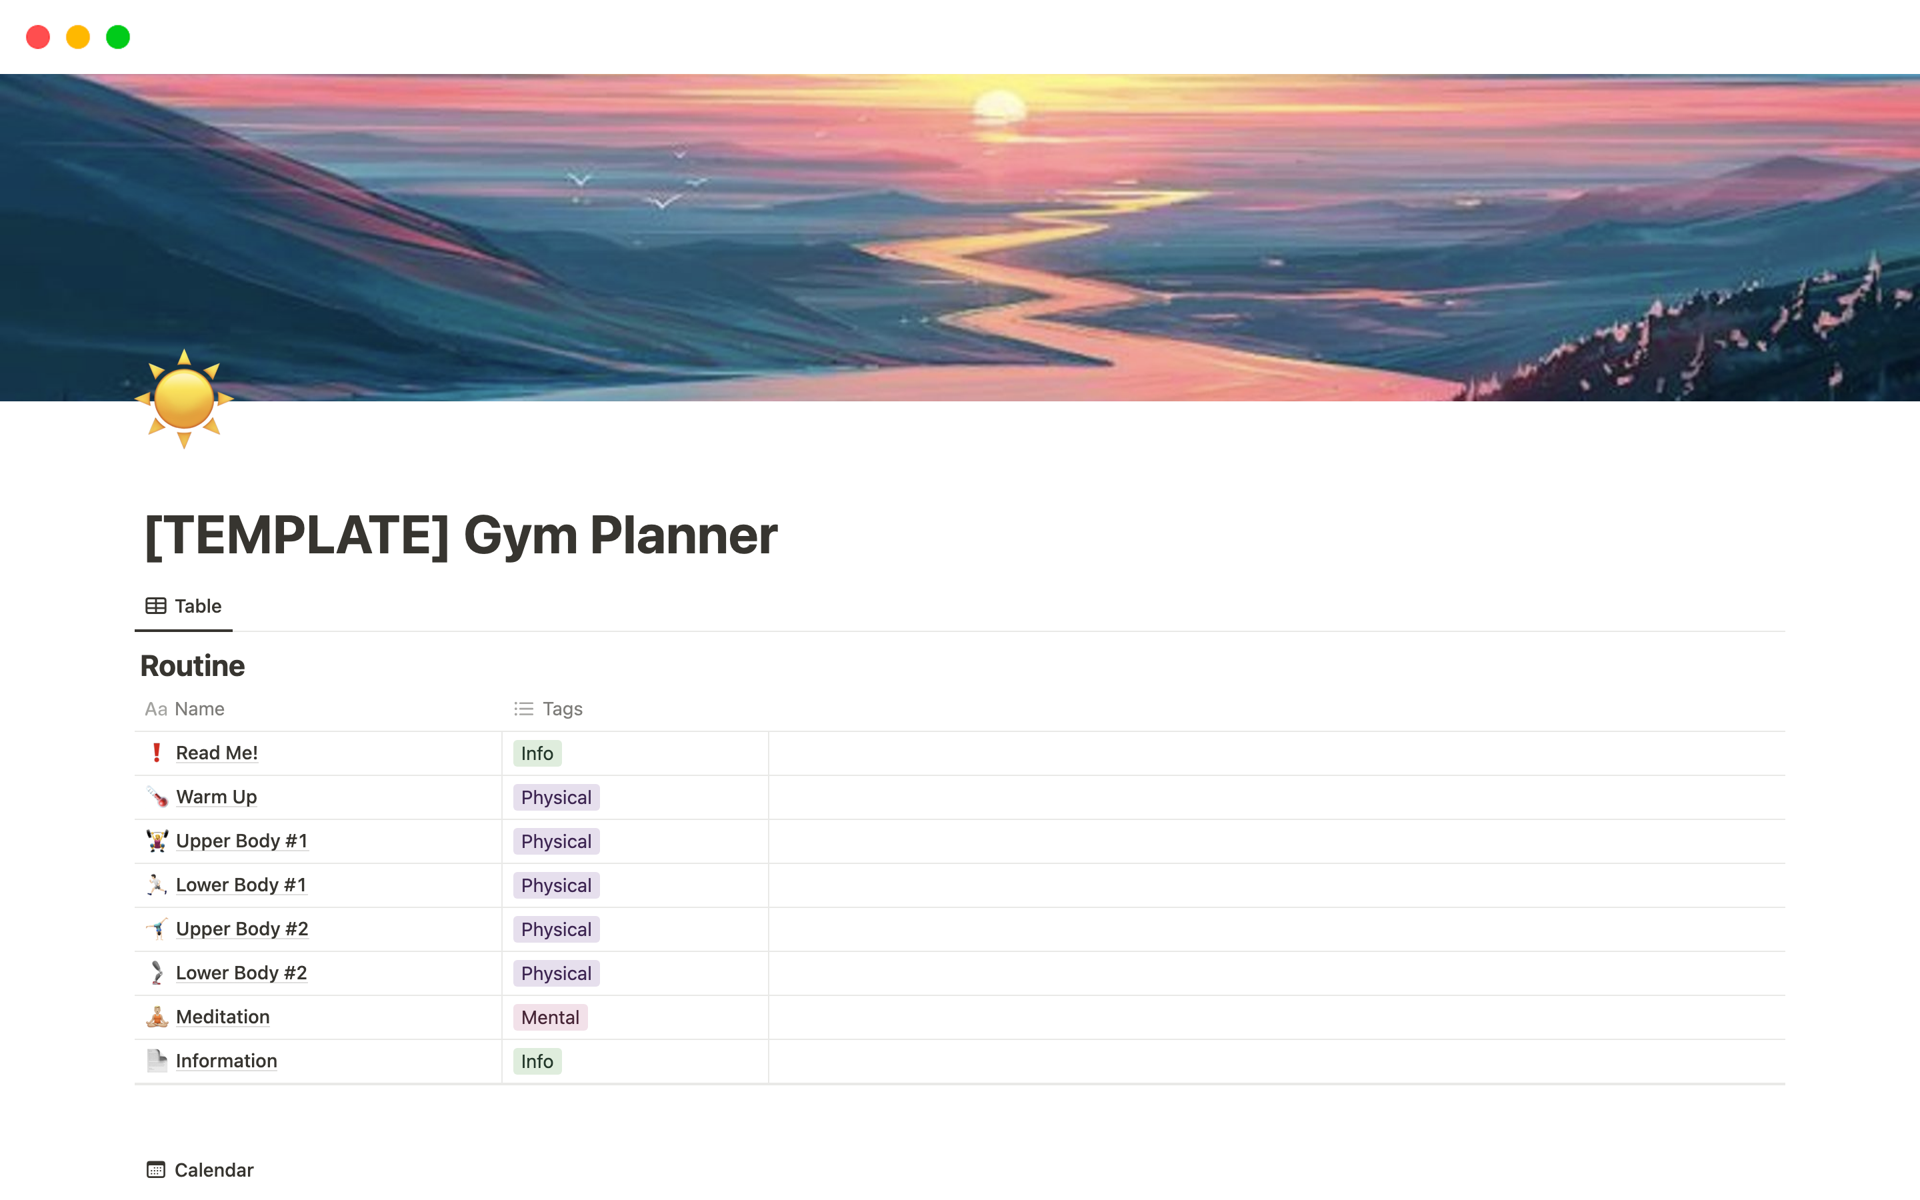 A personalised notion template to plan your workouts, pre-loaded with 4 customisable workouts, recipes, weight trackers and much more.